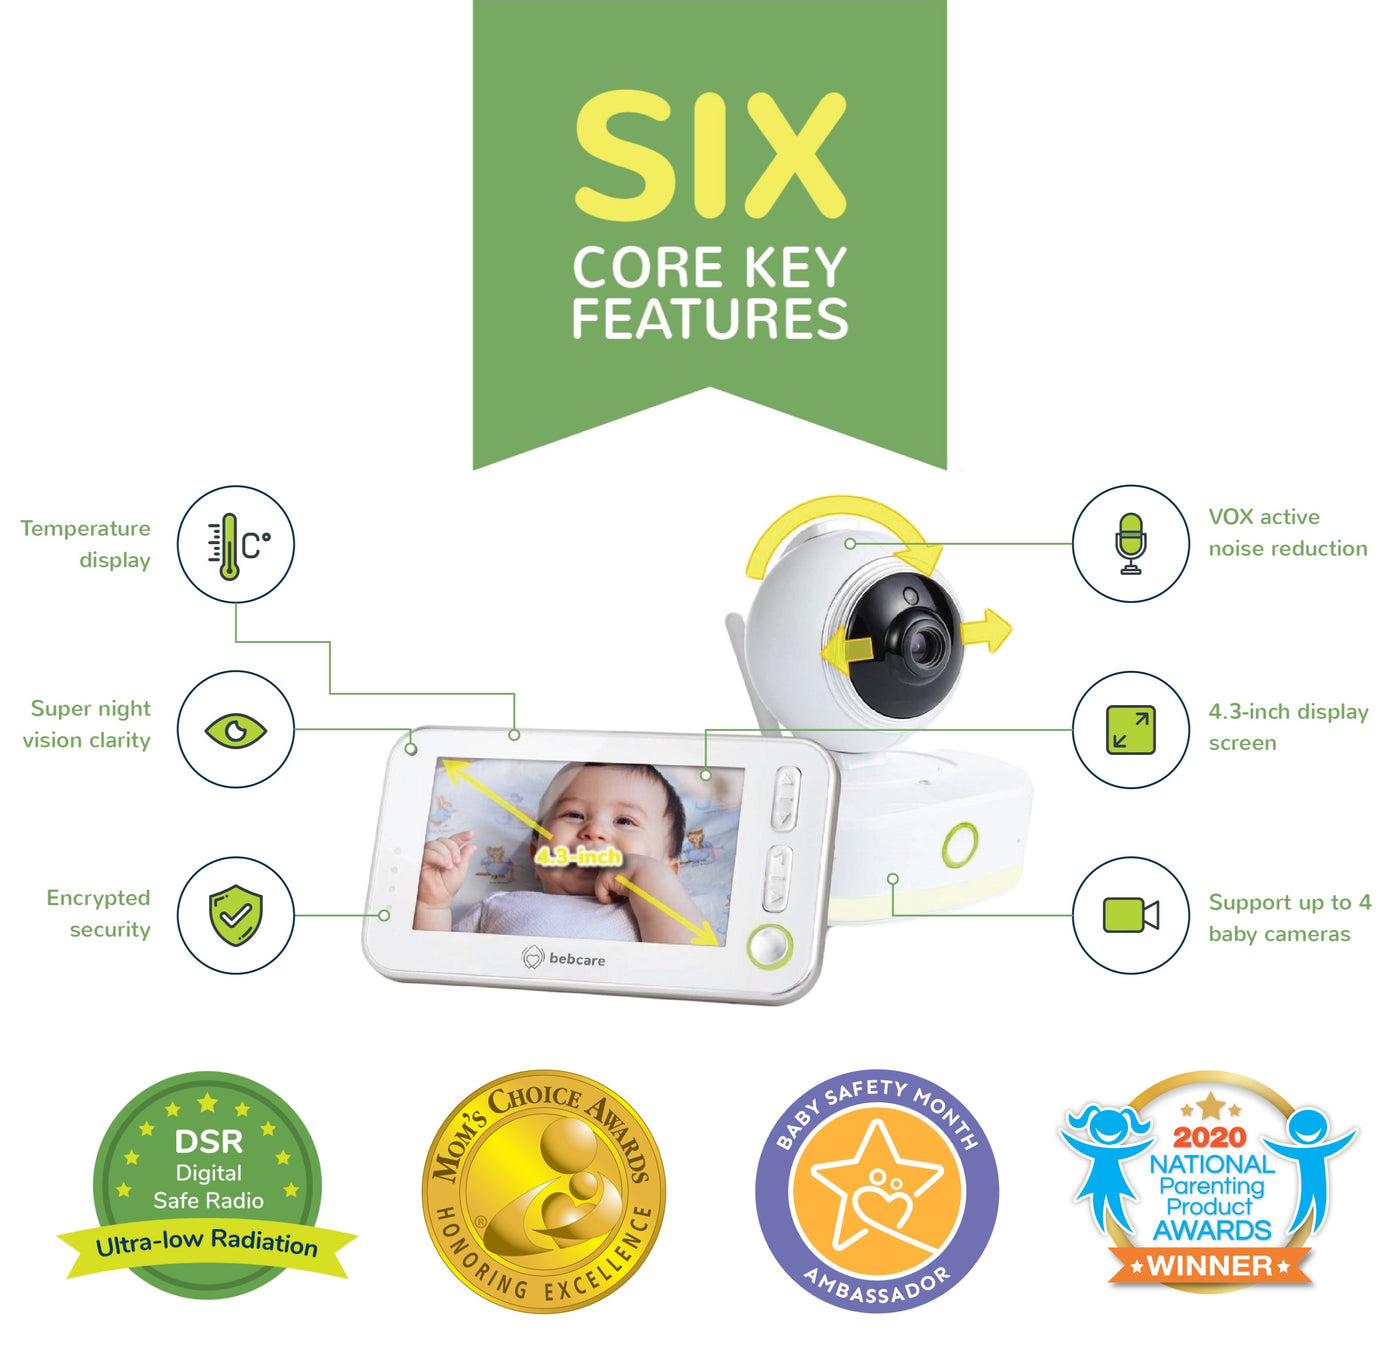 Core features of the award-winning Bebcare Motion